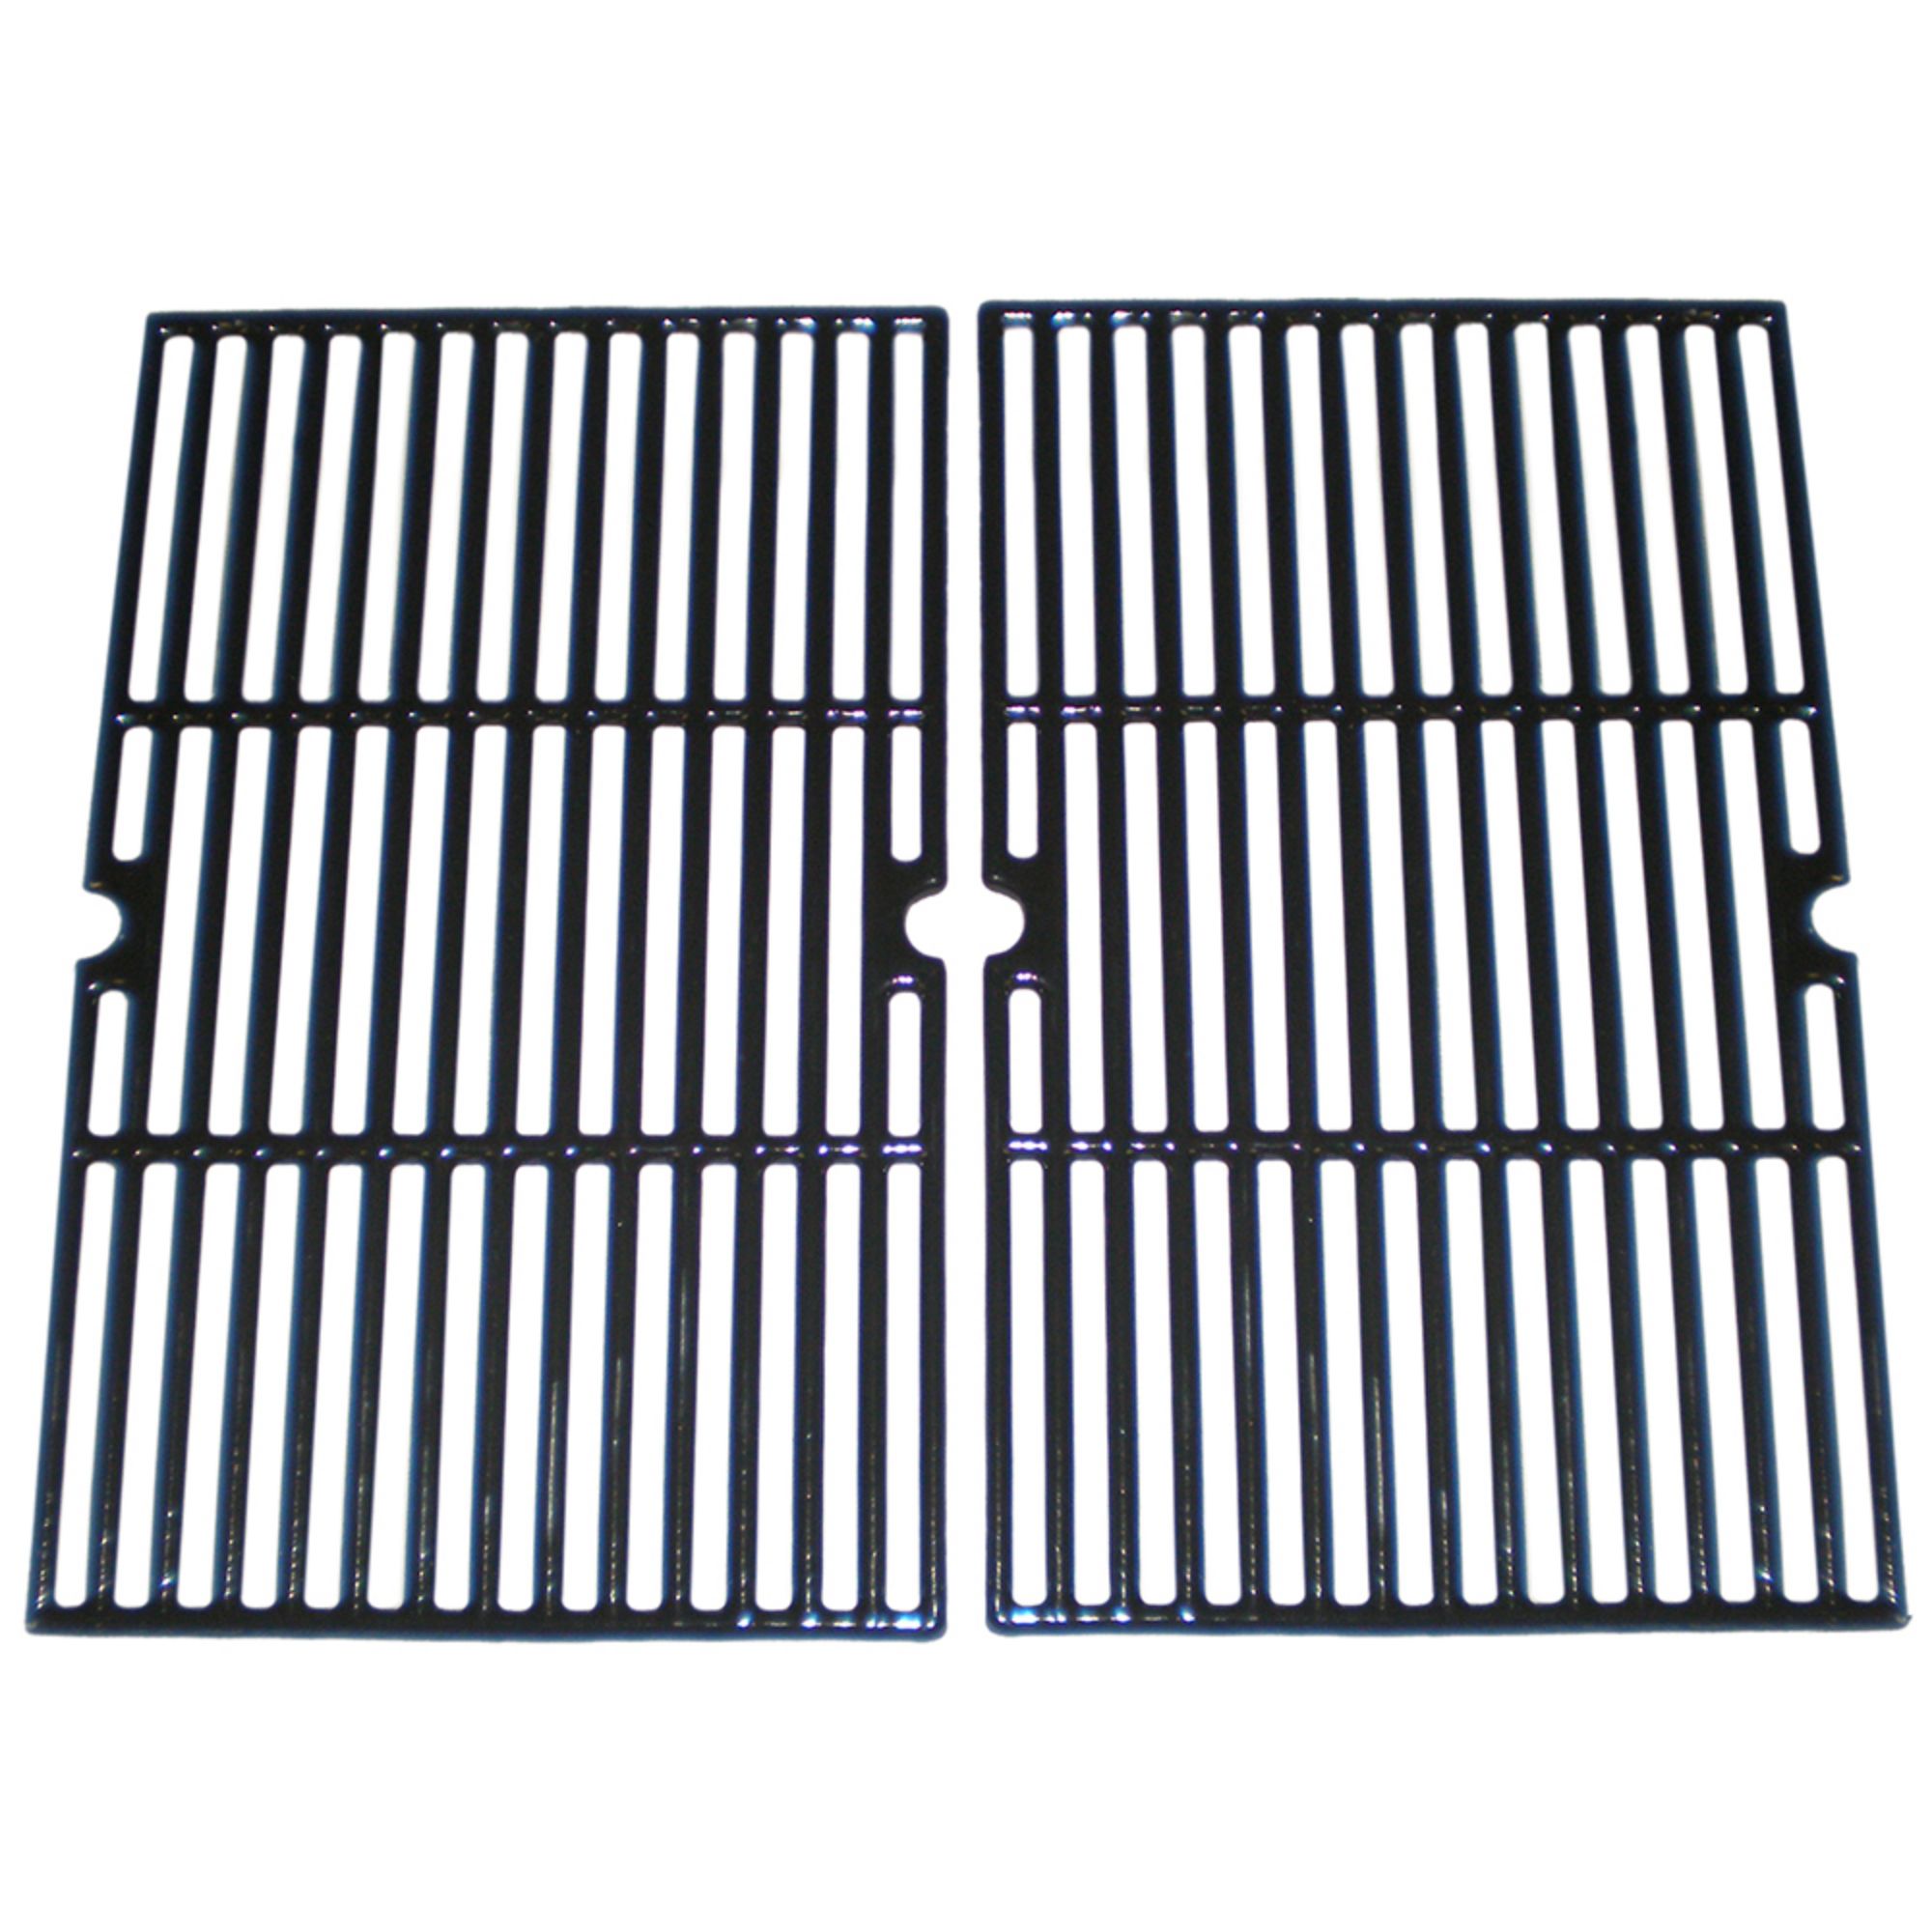 Contemporary Home Living 2pc Gloss Cast Iron Cooking Grid for BBQ Tek and Broil Chef Gas Grills 24.75"